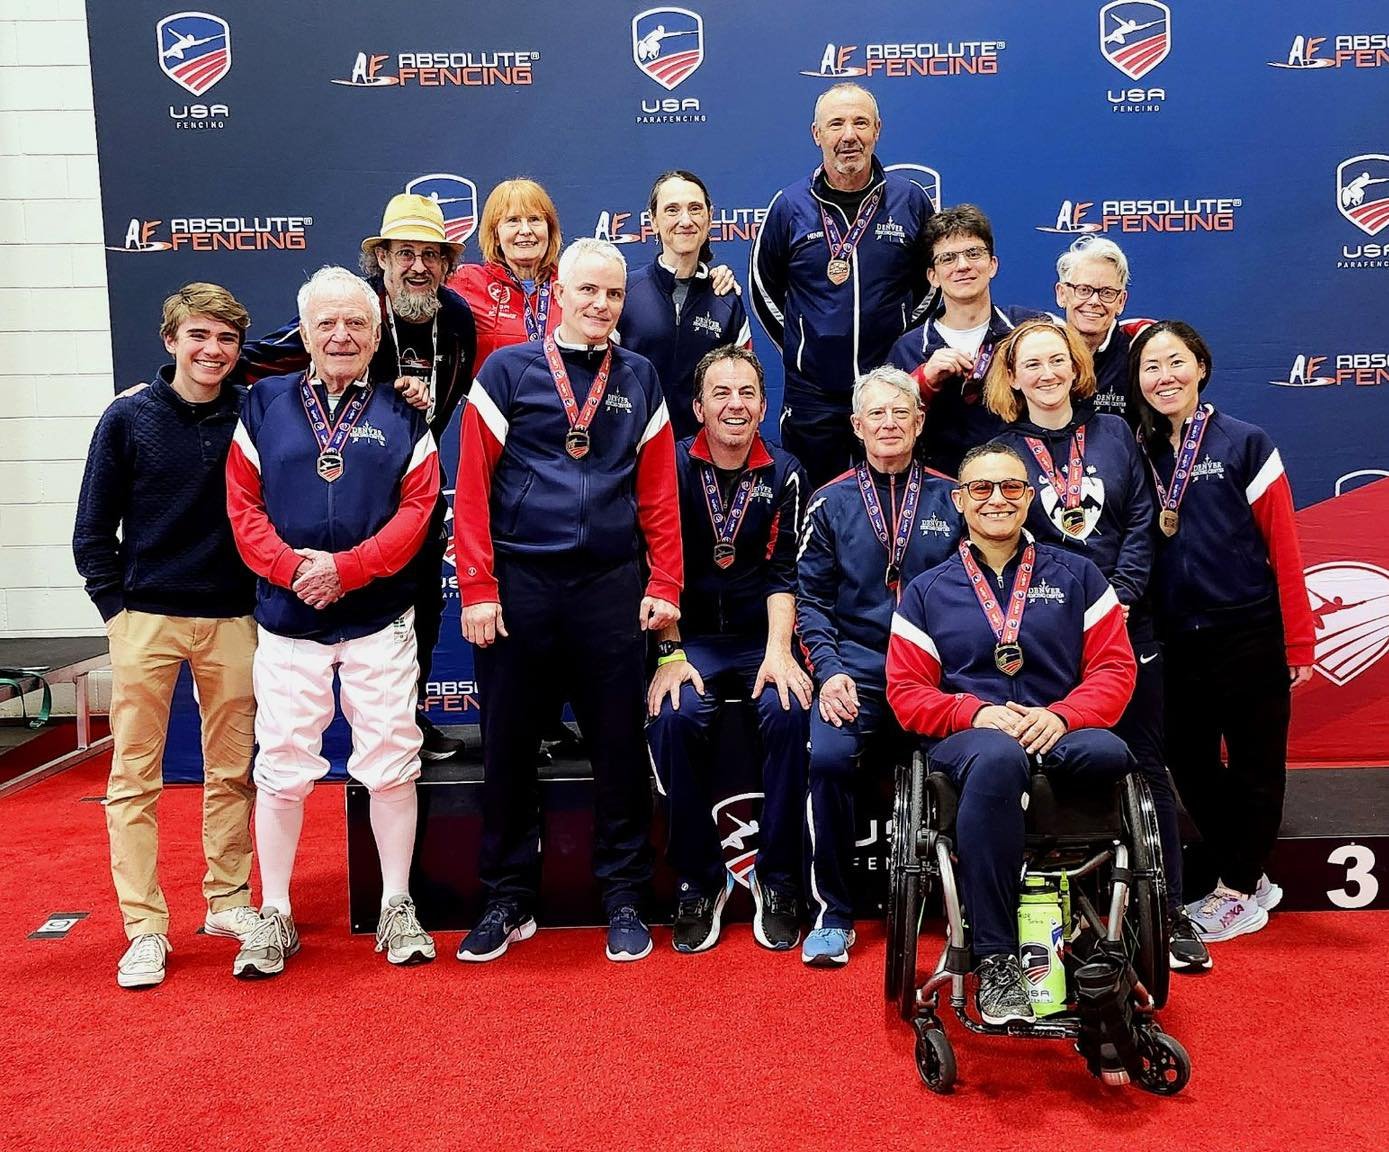 Historic Day: 12 Medals today!  We tried to get all of the medalists and supporters in one photo.  We miss a couple of people.  Congratulations:
Gold/National Champion: Jataya Taylor - Para Women&rsquo;s Foil
Gold - Tom Lutton - Vet 70 Men&rsquo;s Fo